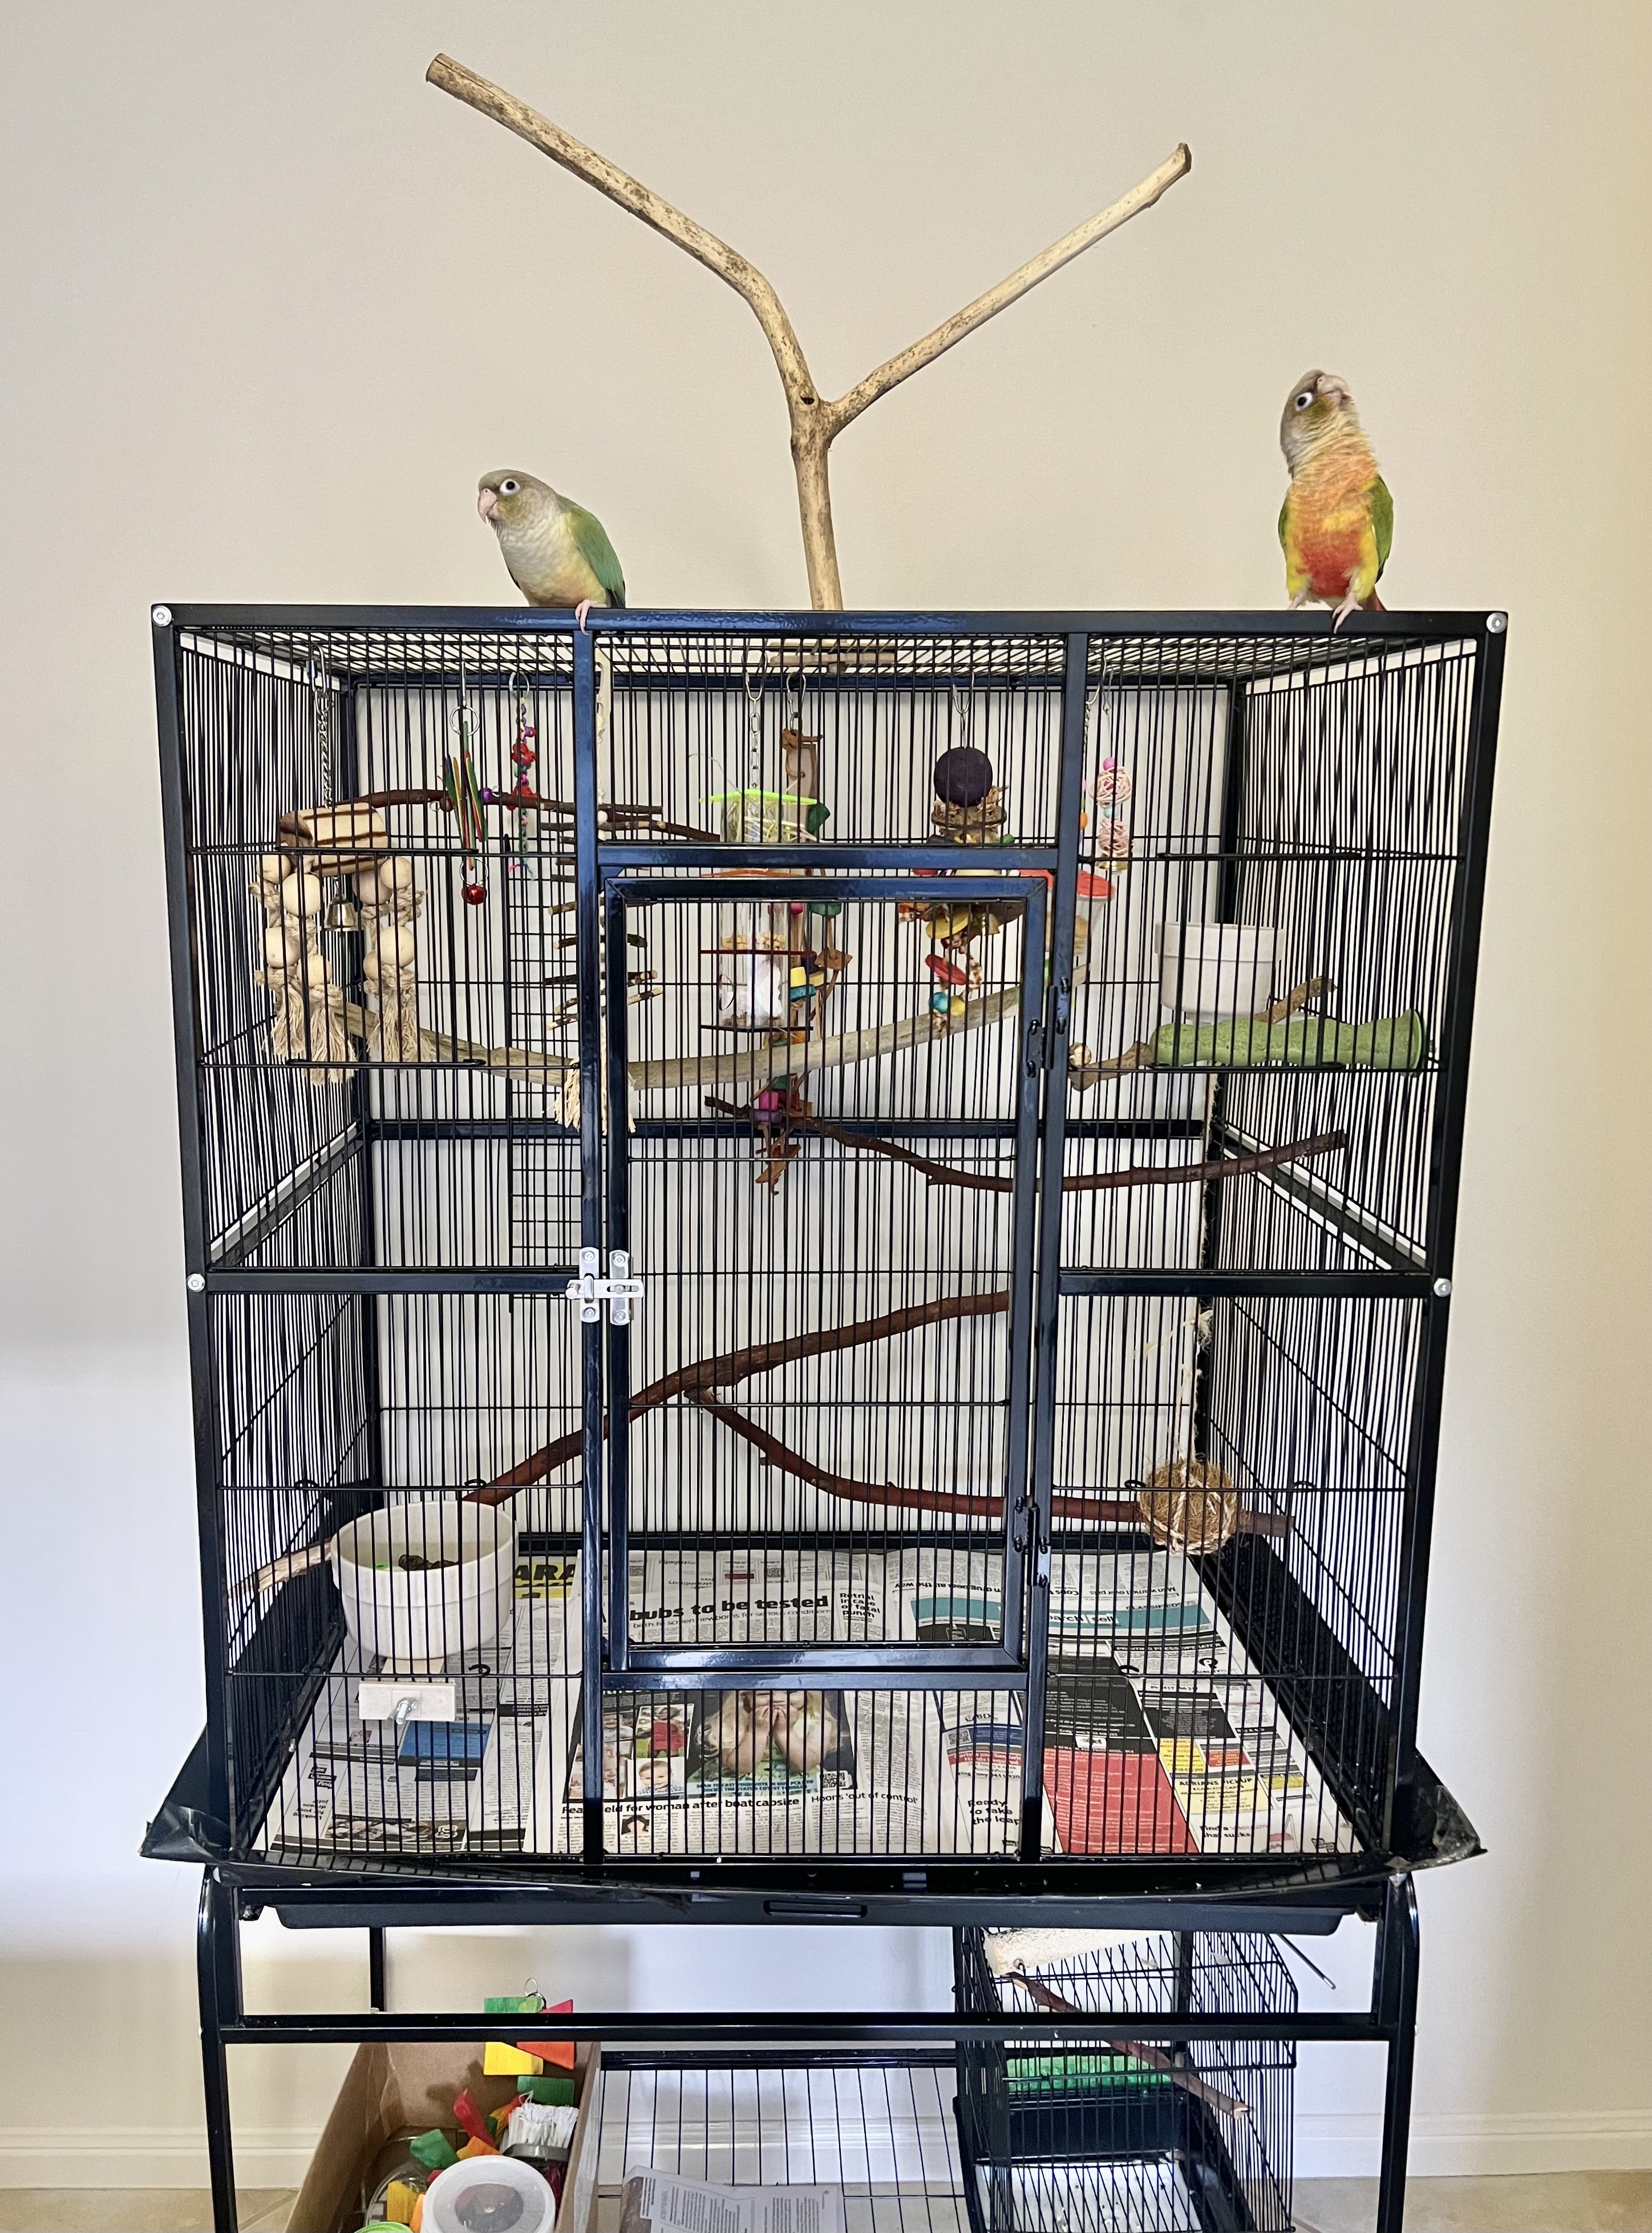 Bonded Pair of HR Green-Cheeked Conures